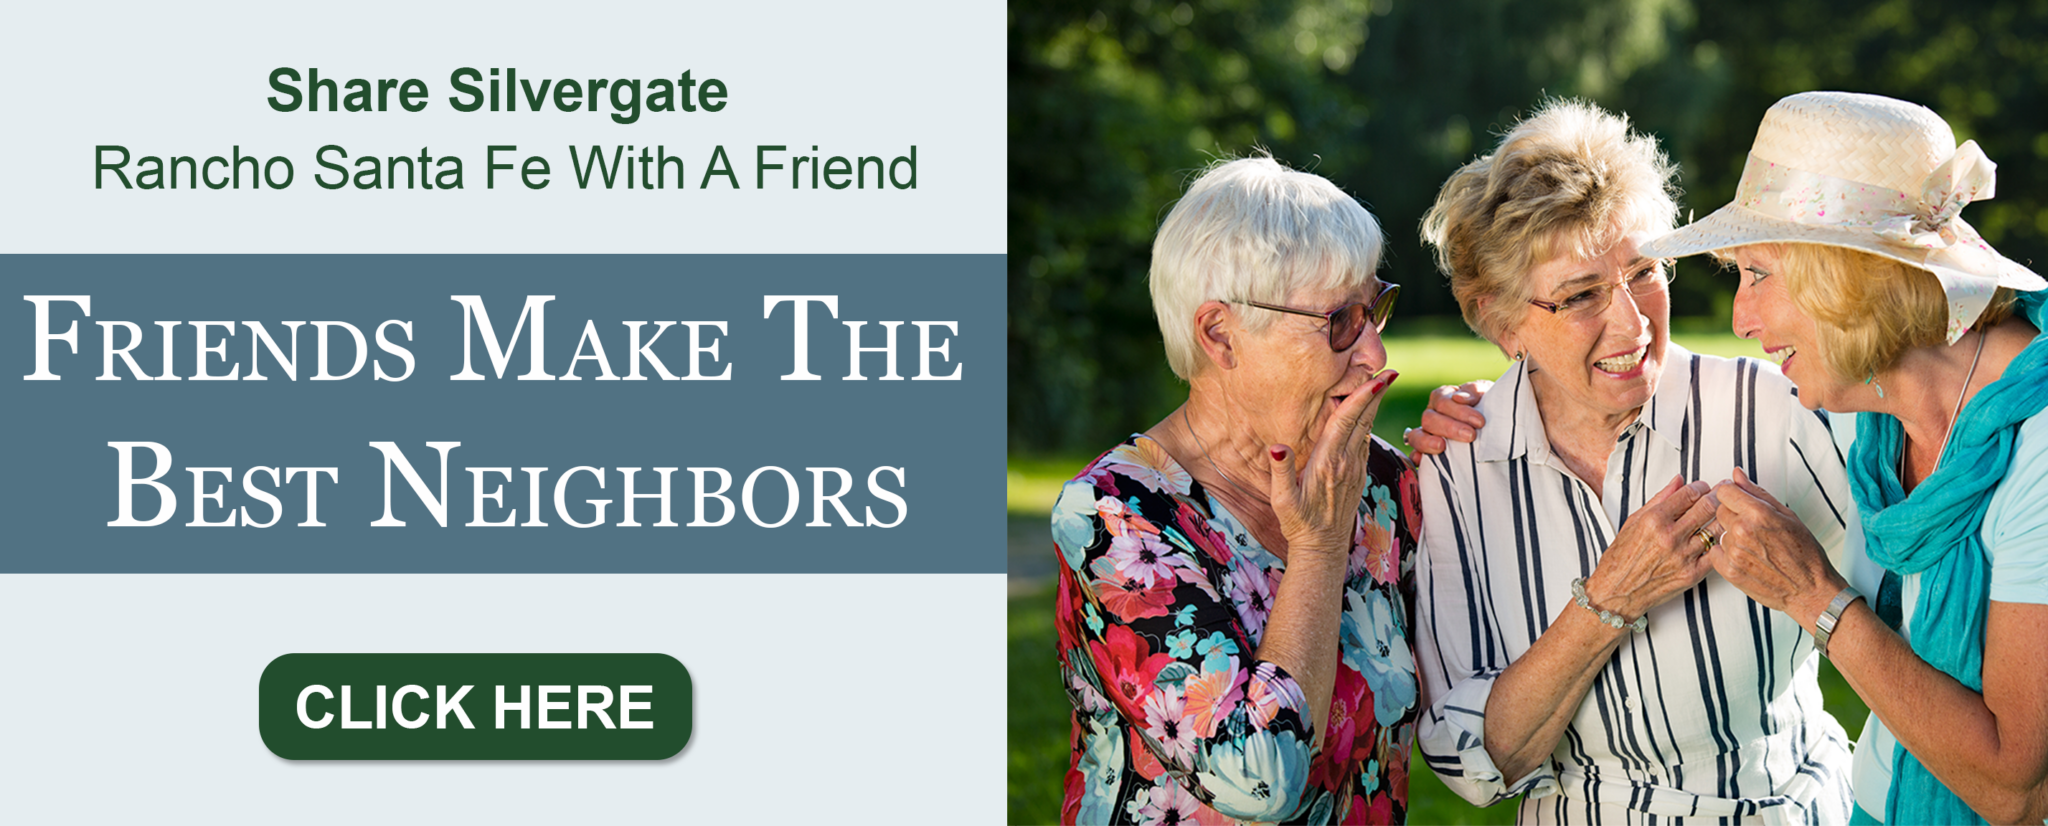 Share Silvergate with a friend